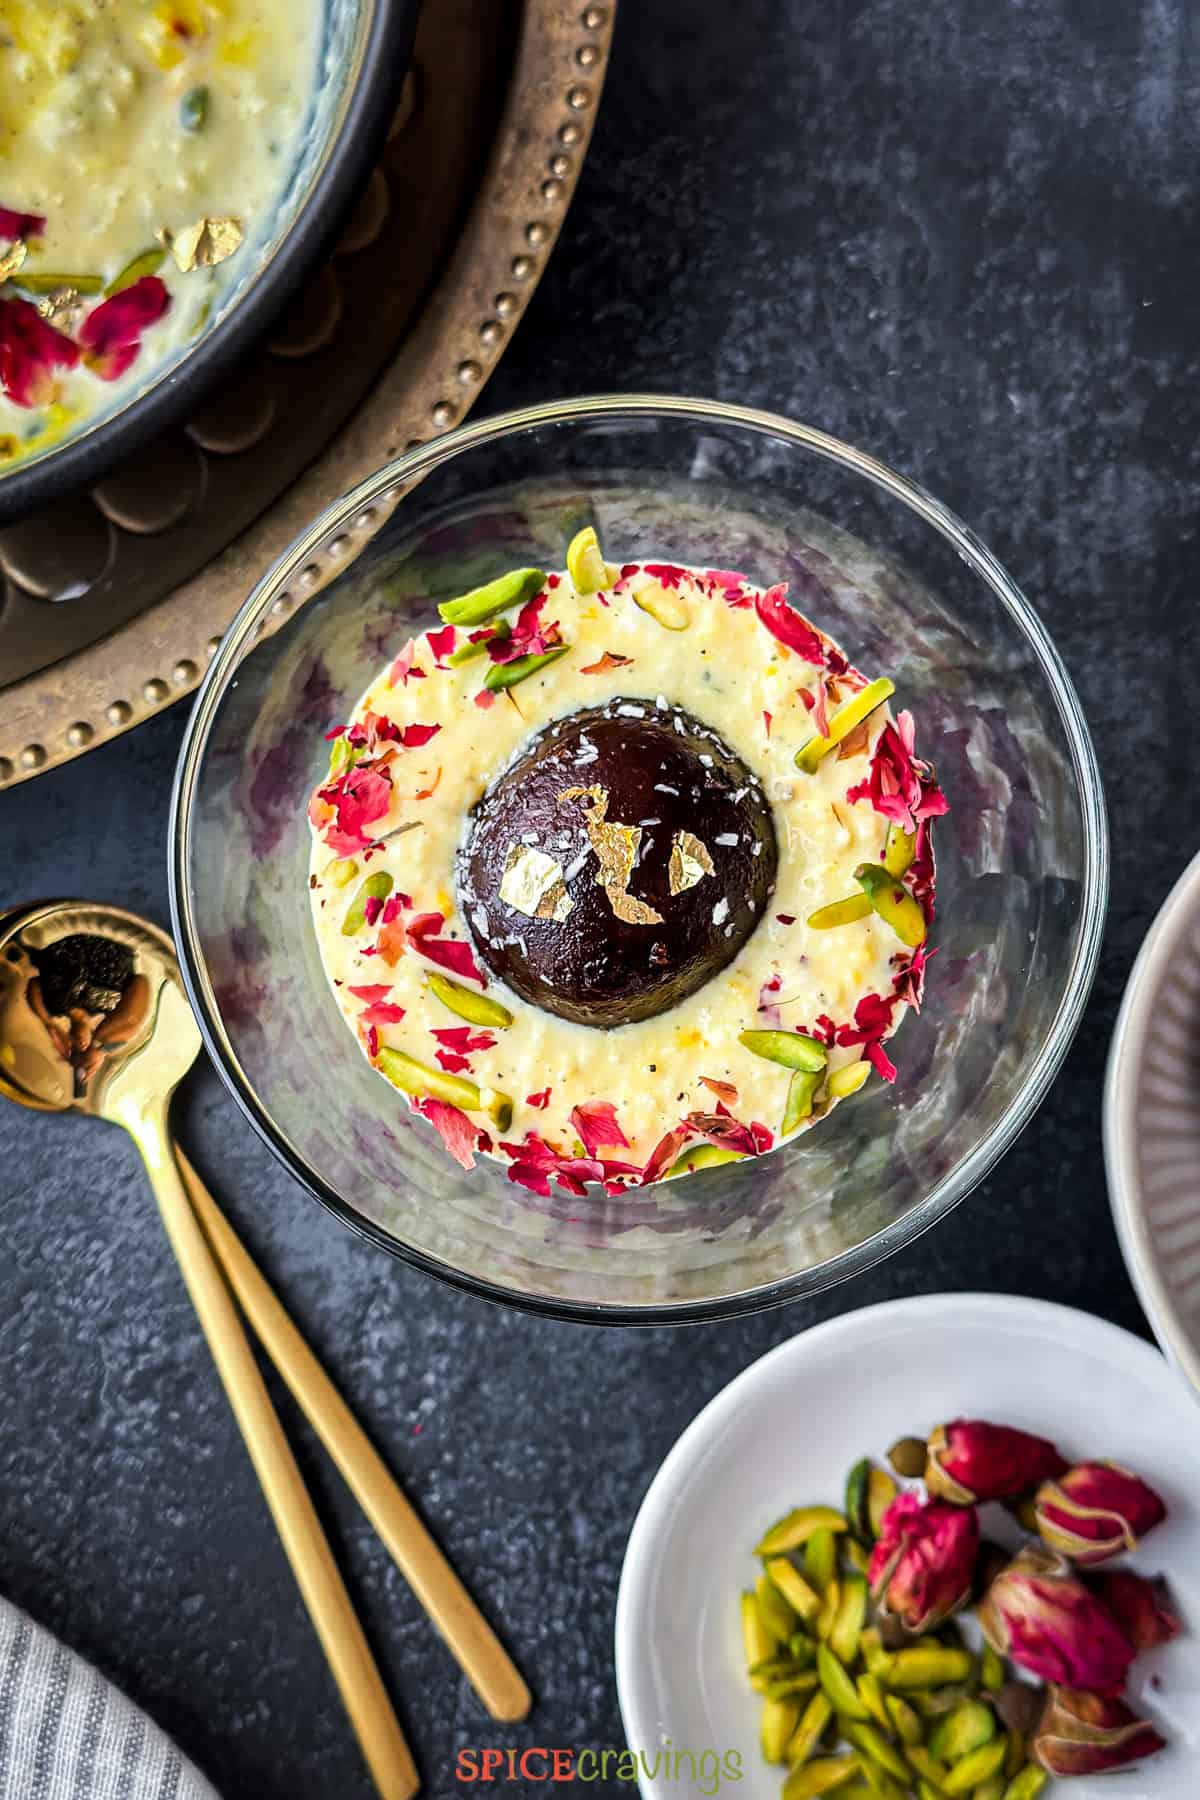 Gulab jamun dipped in a glass of rabdi and garnished with rose and pistachios